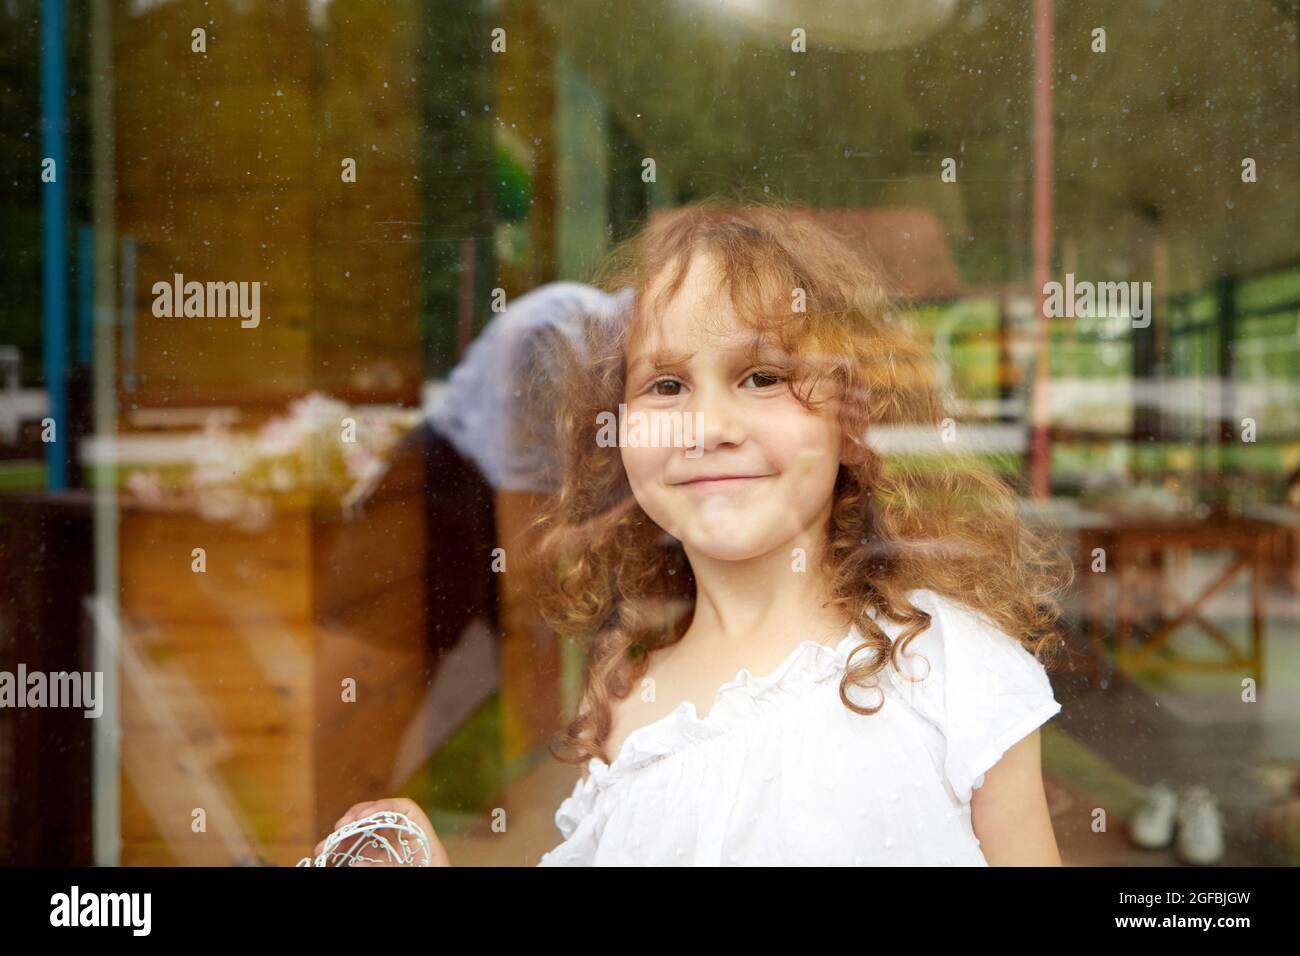 Cute happy girl with curly hair smiling and looking at camera while standing behind transparent glass Stock Photo